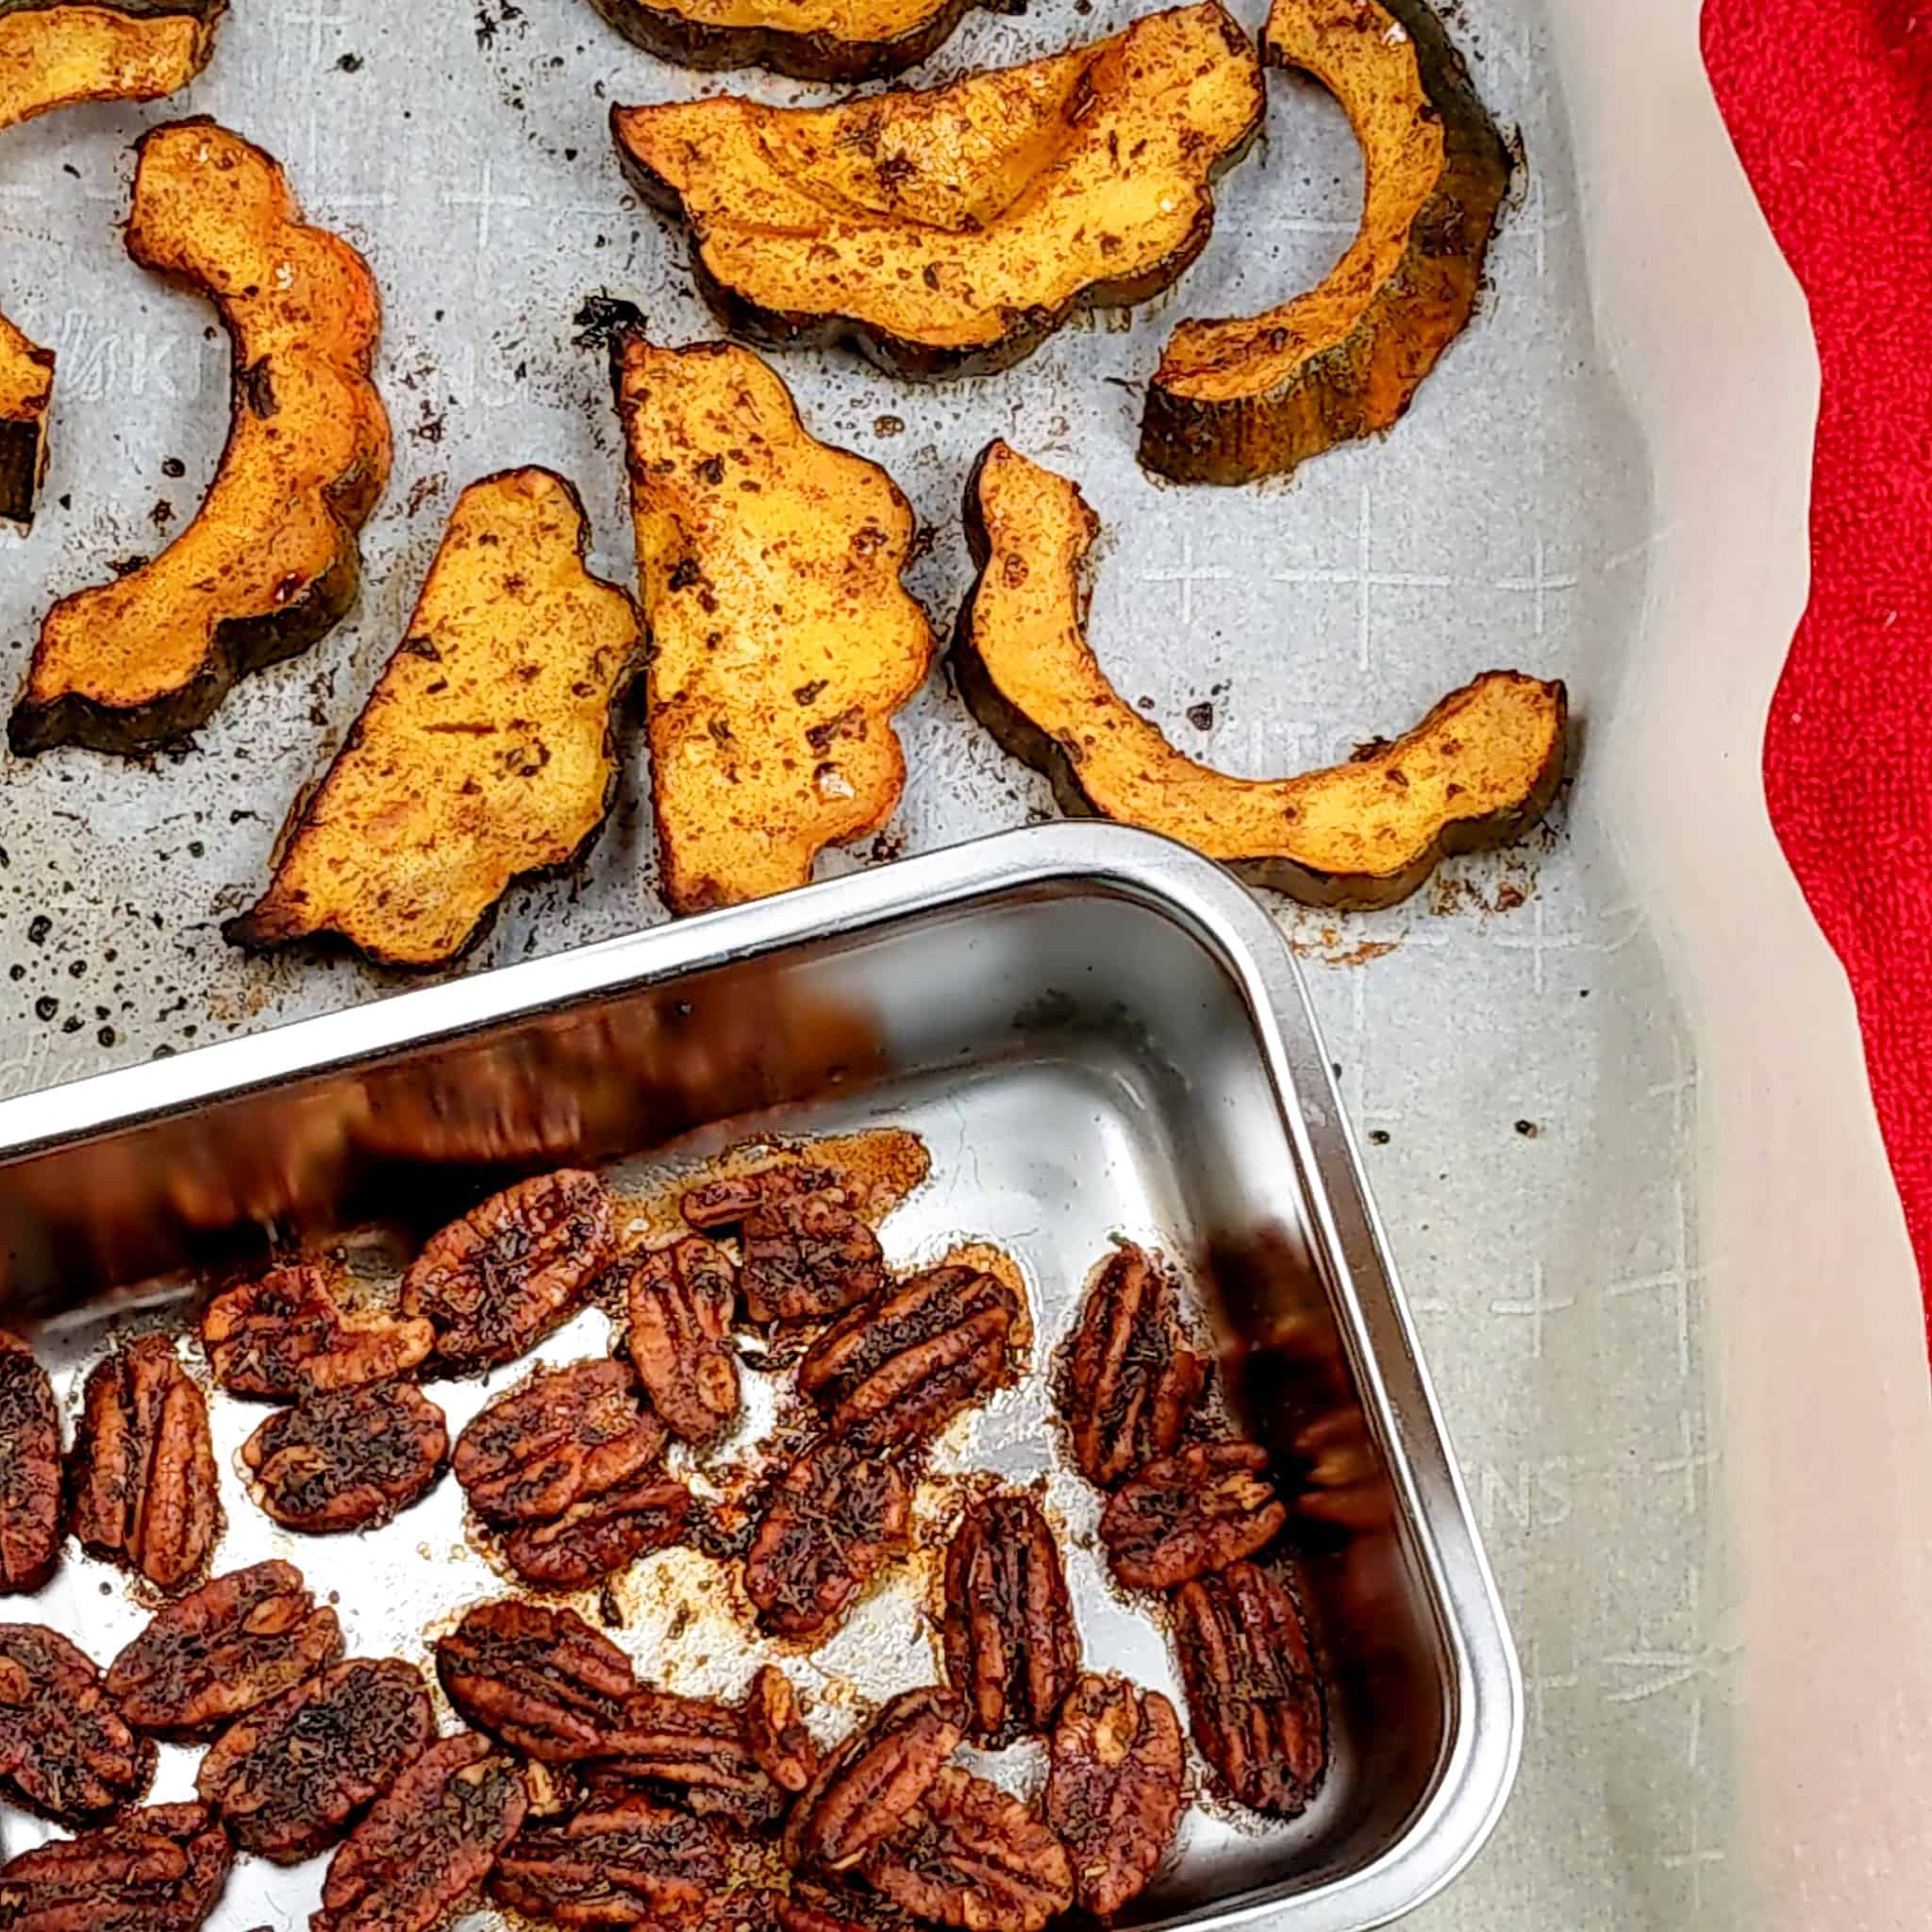 roasted sliced acorn squash and a small deep metal tray of maple syrup sauce coated pecans on a sheet pan lined with parchment paper